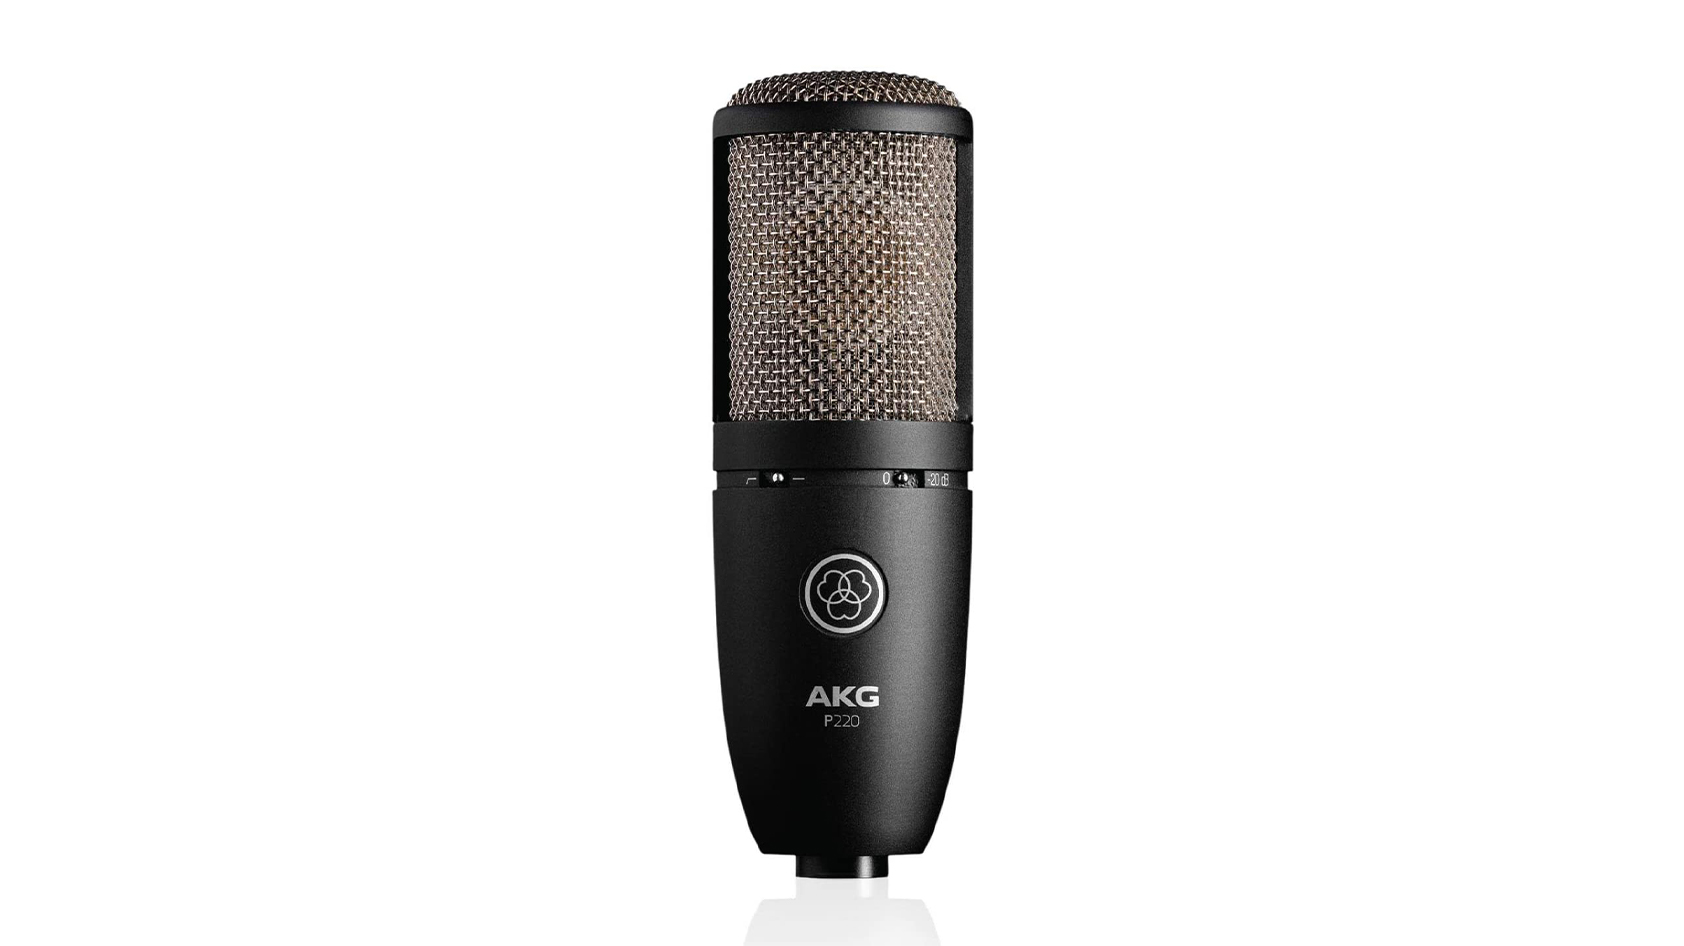 A product image of the AKG P420 XLR microphone in black against a white background.